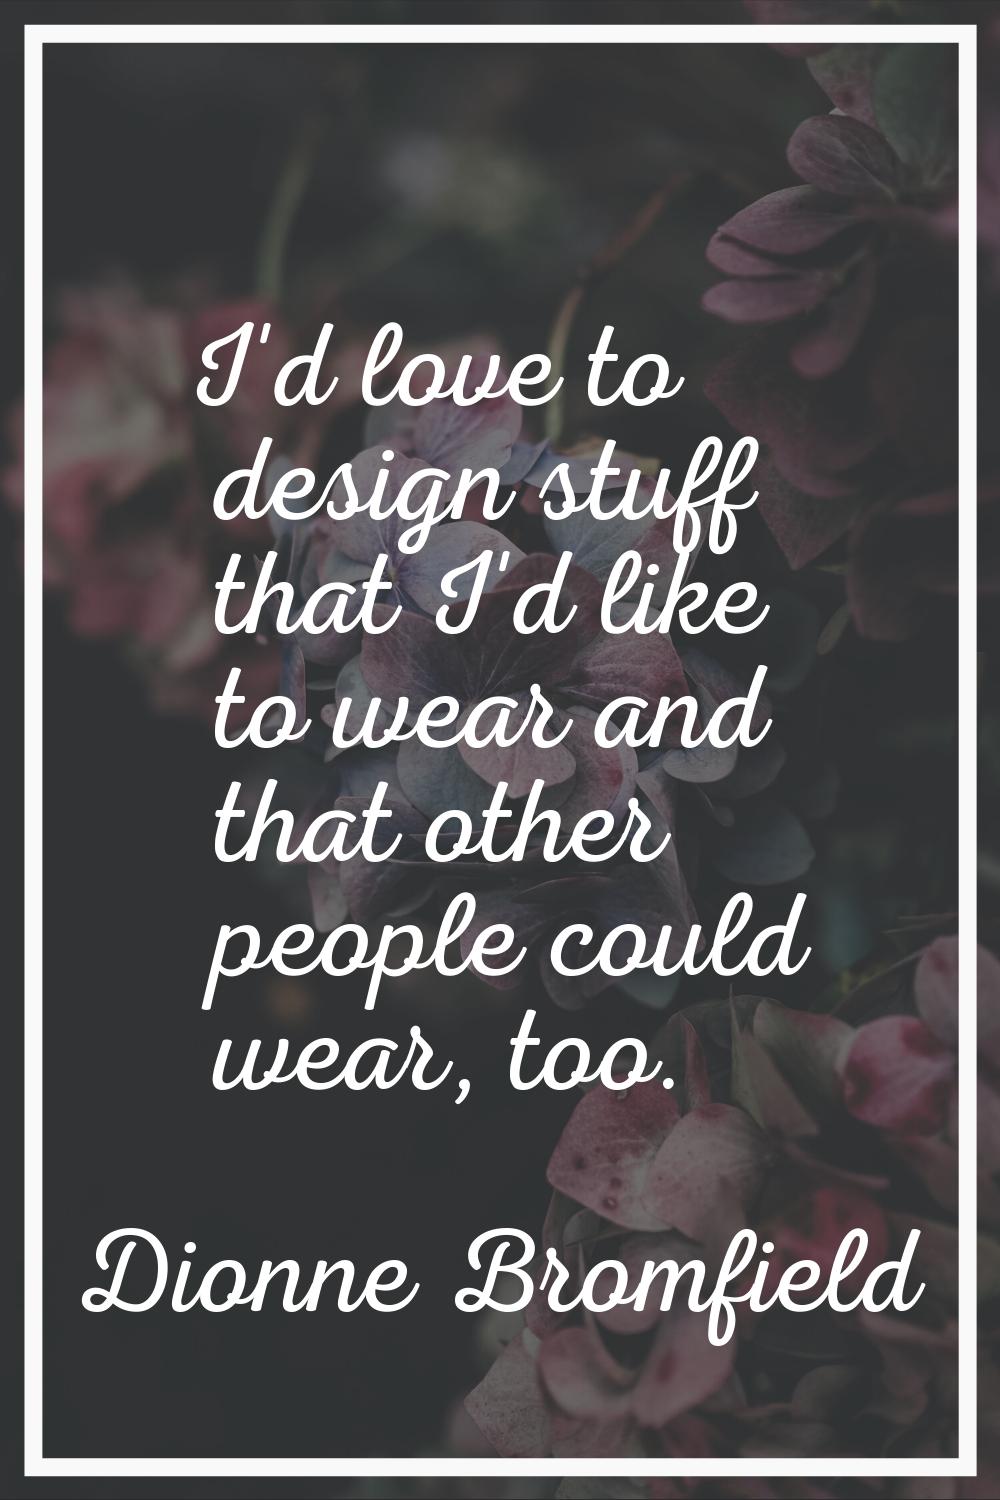 I'd love to design stuff that I'd like to wear and that other people could wear, too.